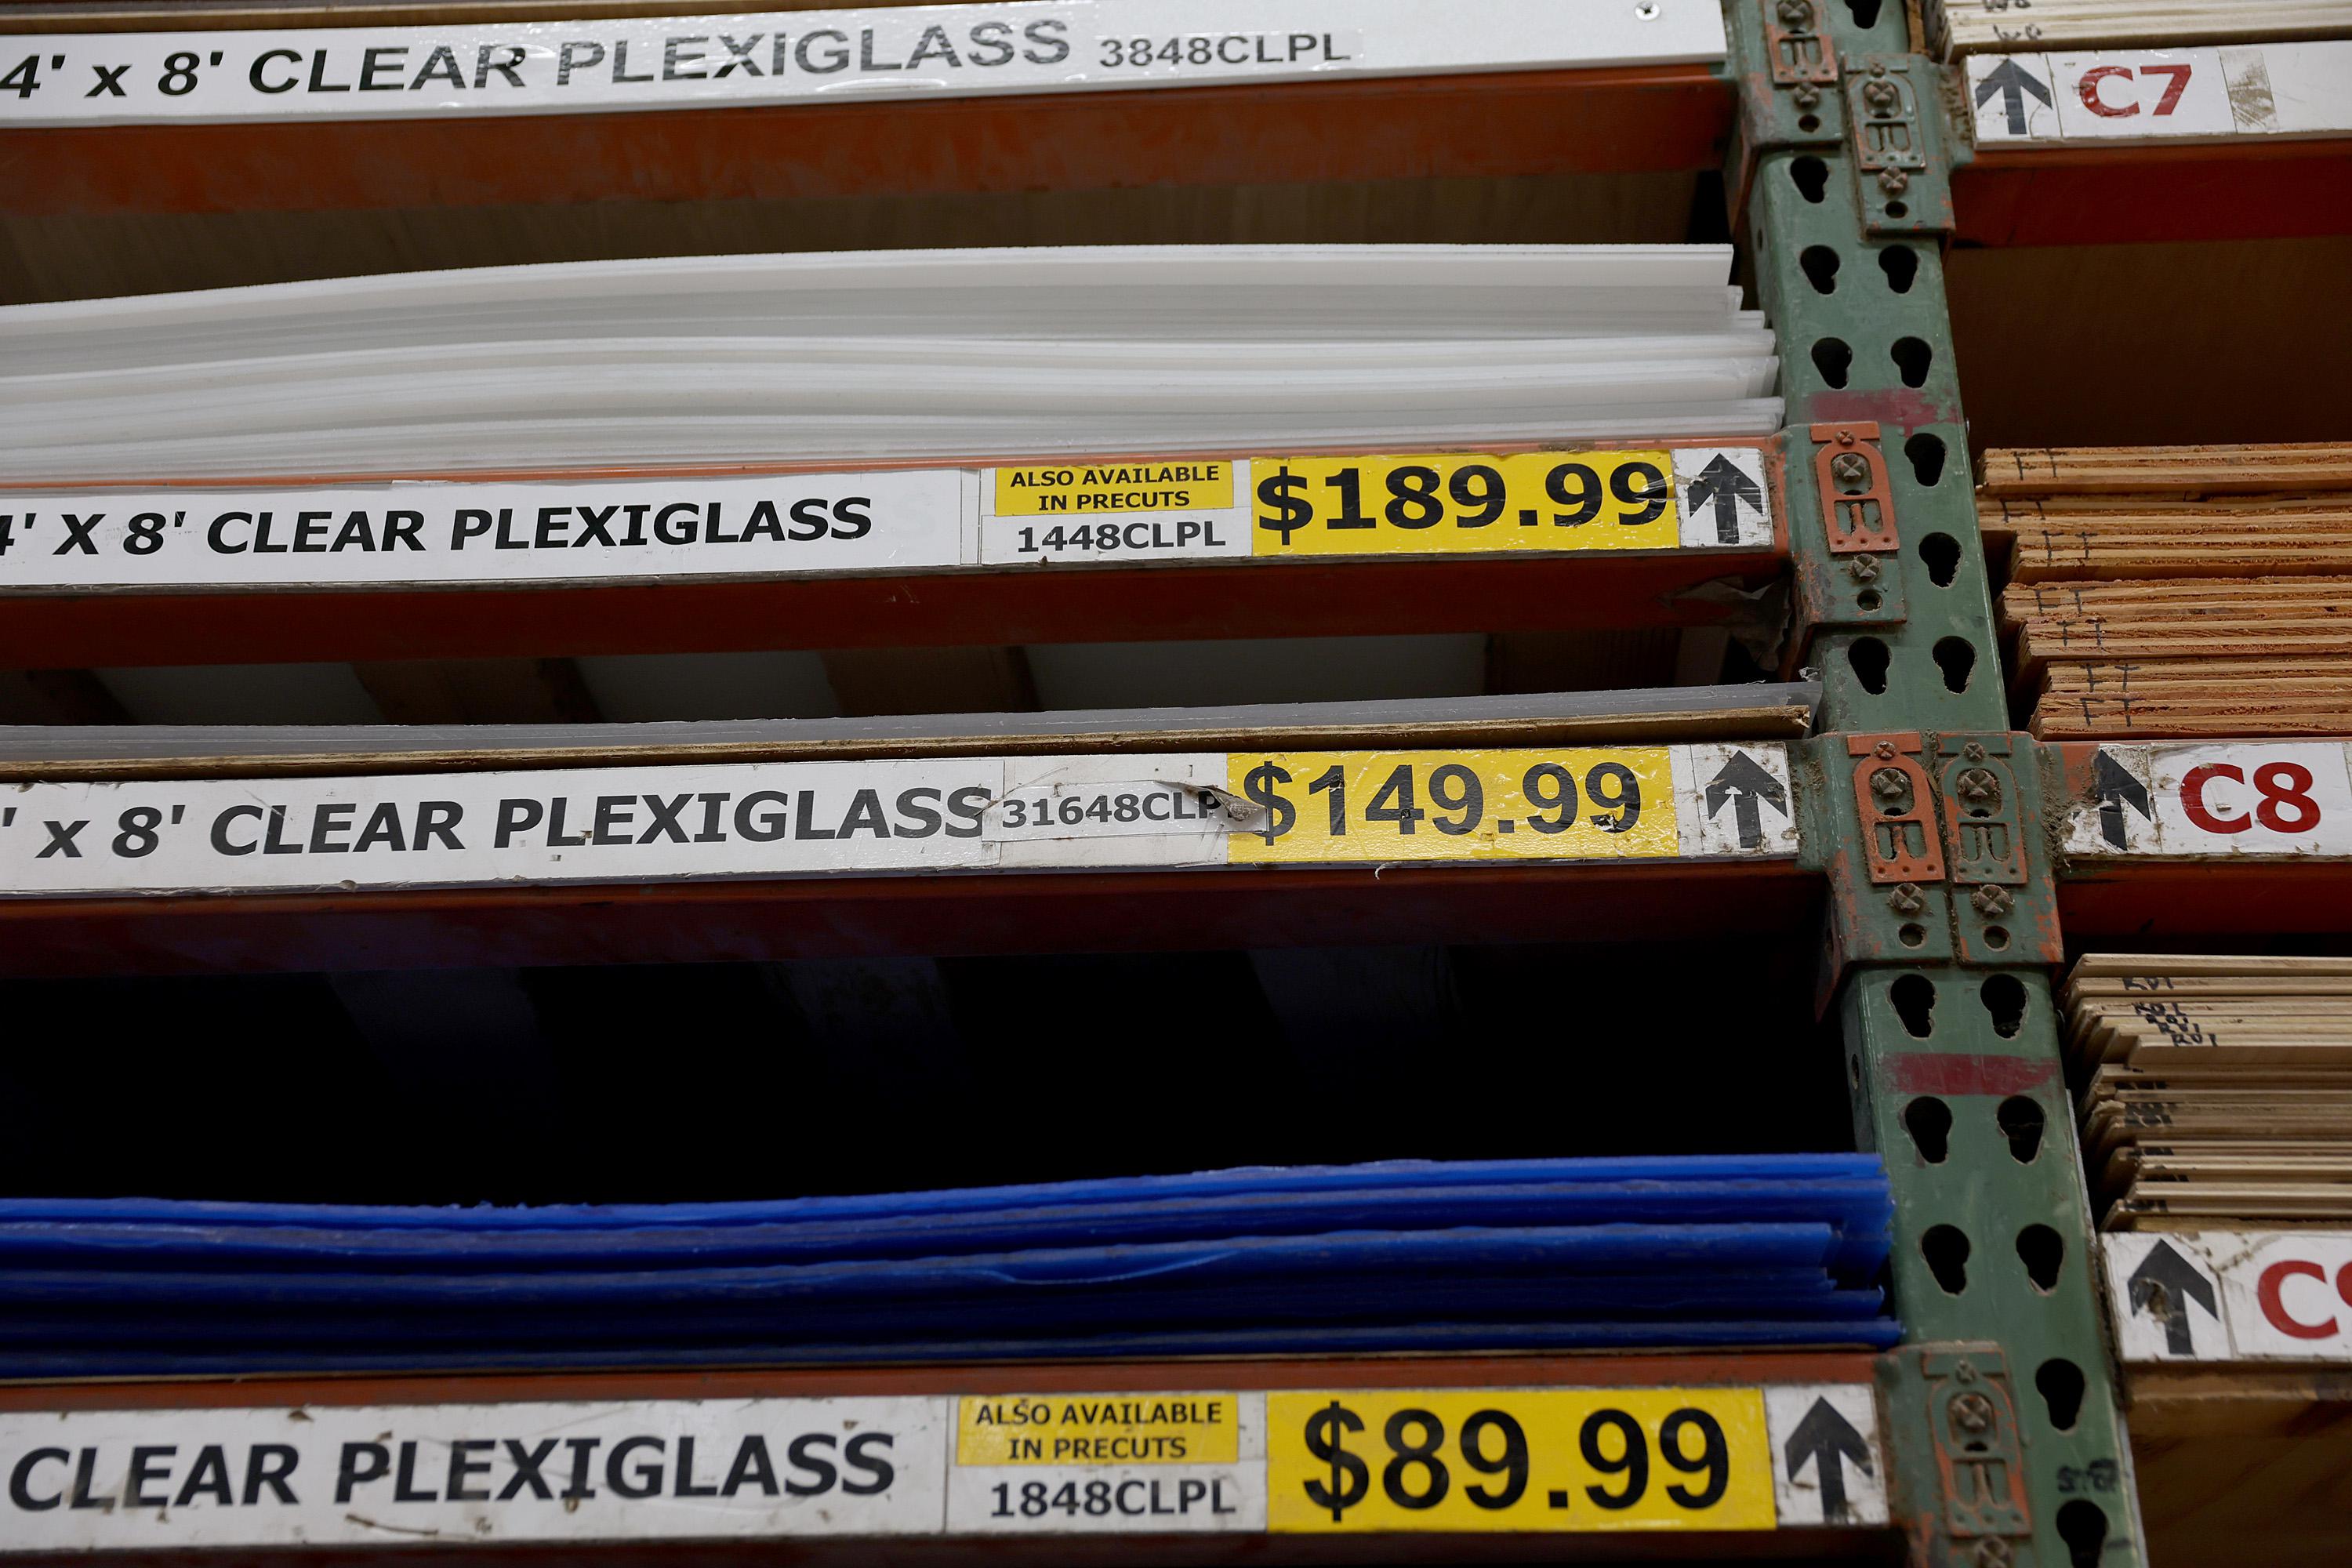 Prices are marked for clear plexiglass at the Shell Lumber and Hardware home improvement store on February 10, 2022 in Miami, Florida. The Labor Department announced that consumer prices jumped 7.5% last month compared with 12 months earlier, the steepest year-over-year increase since February 1982.  (Photo by Joe Raedle/Getty Images)